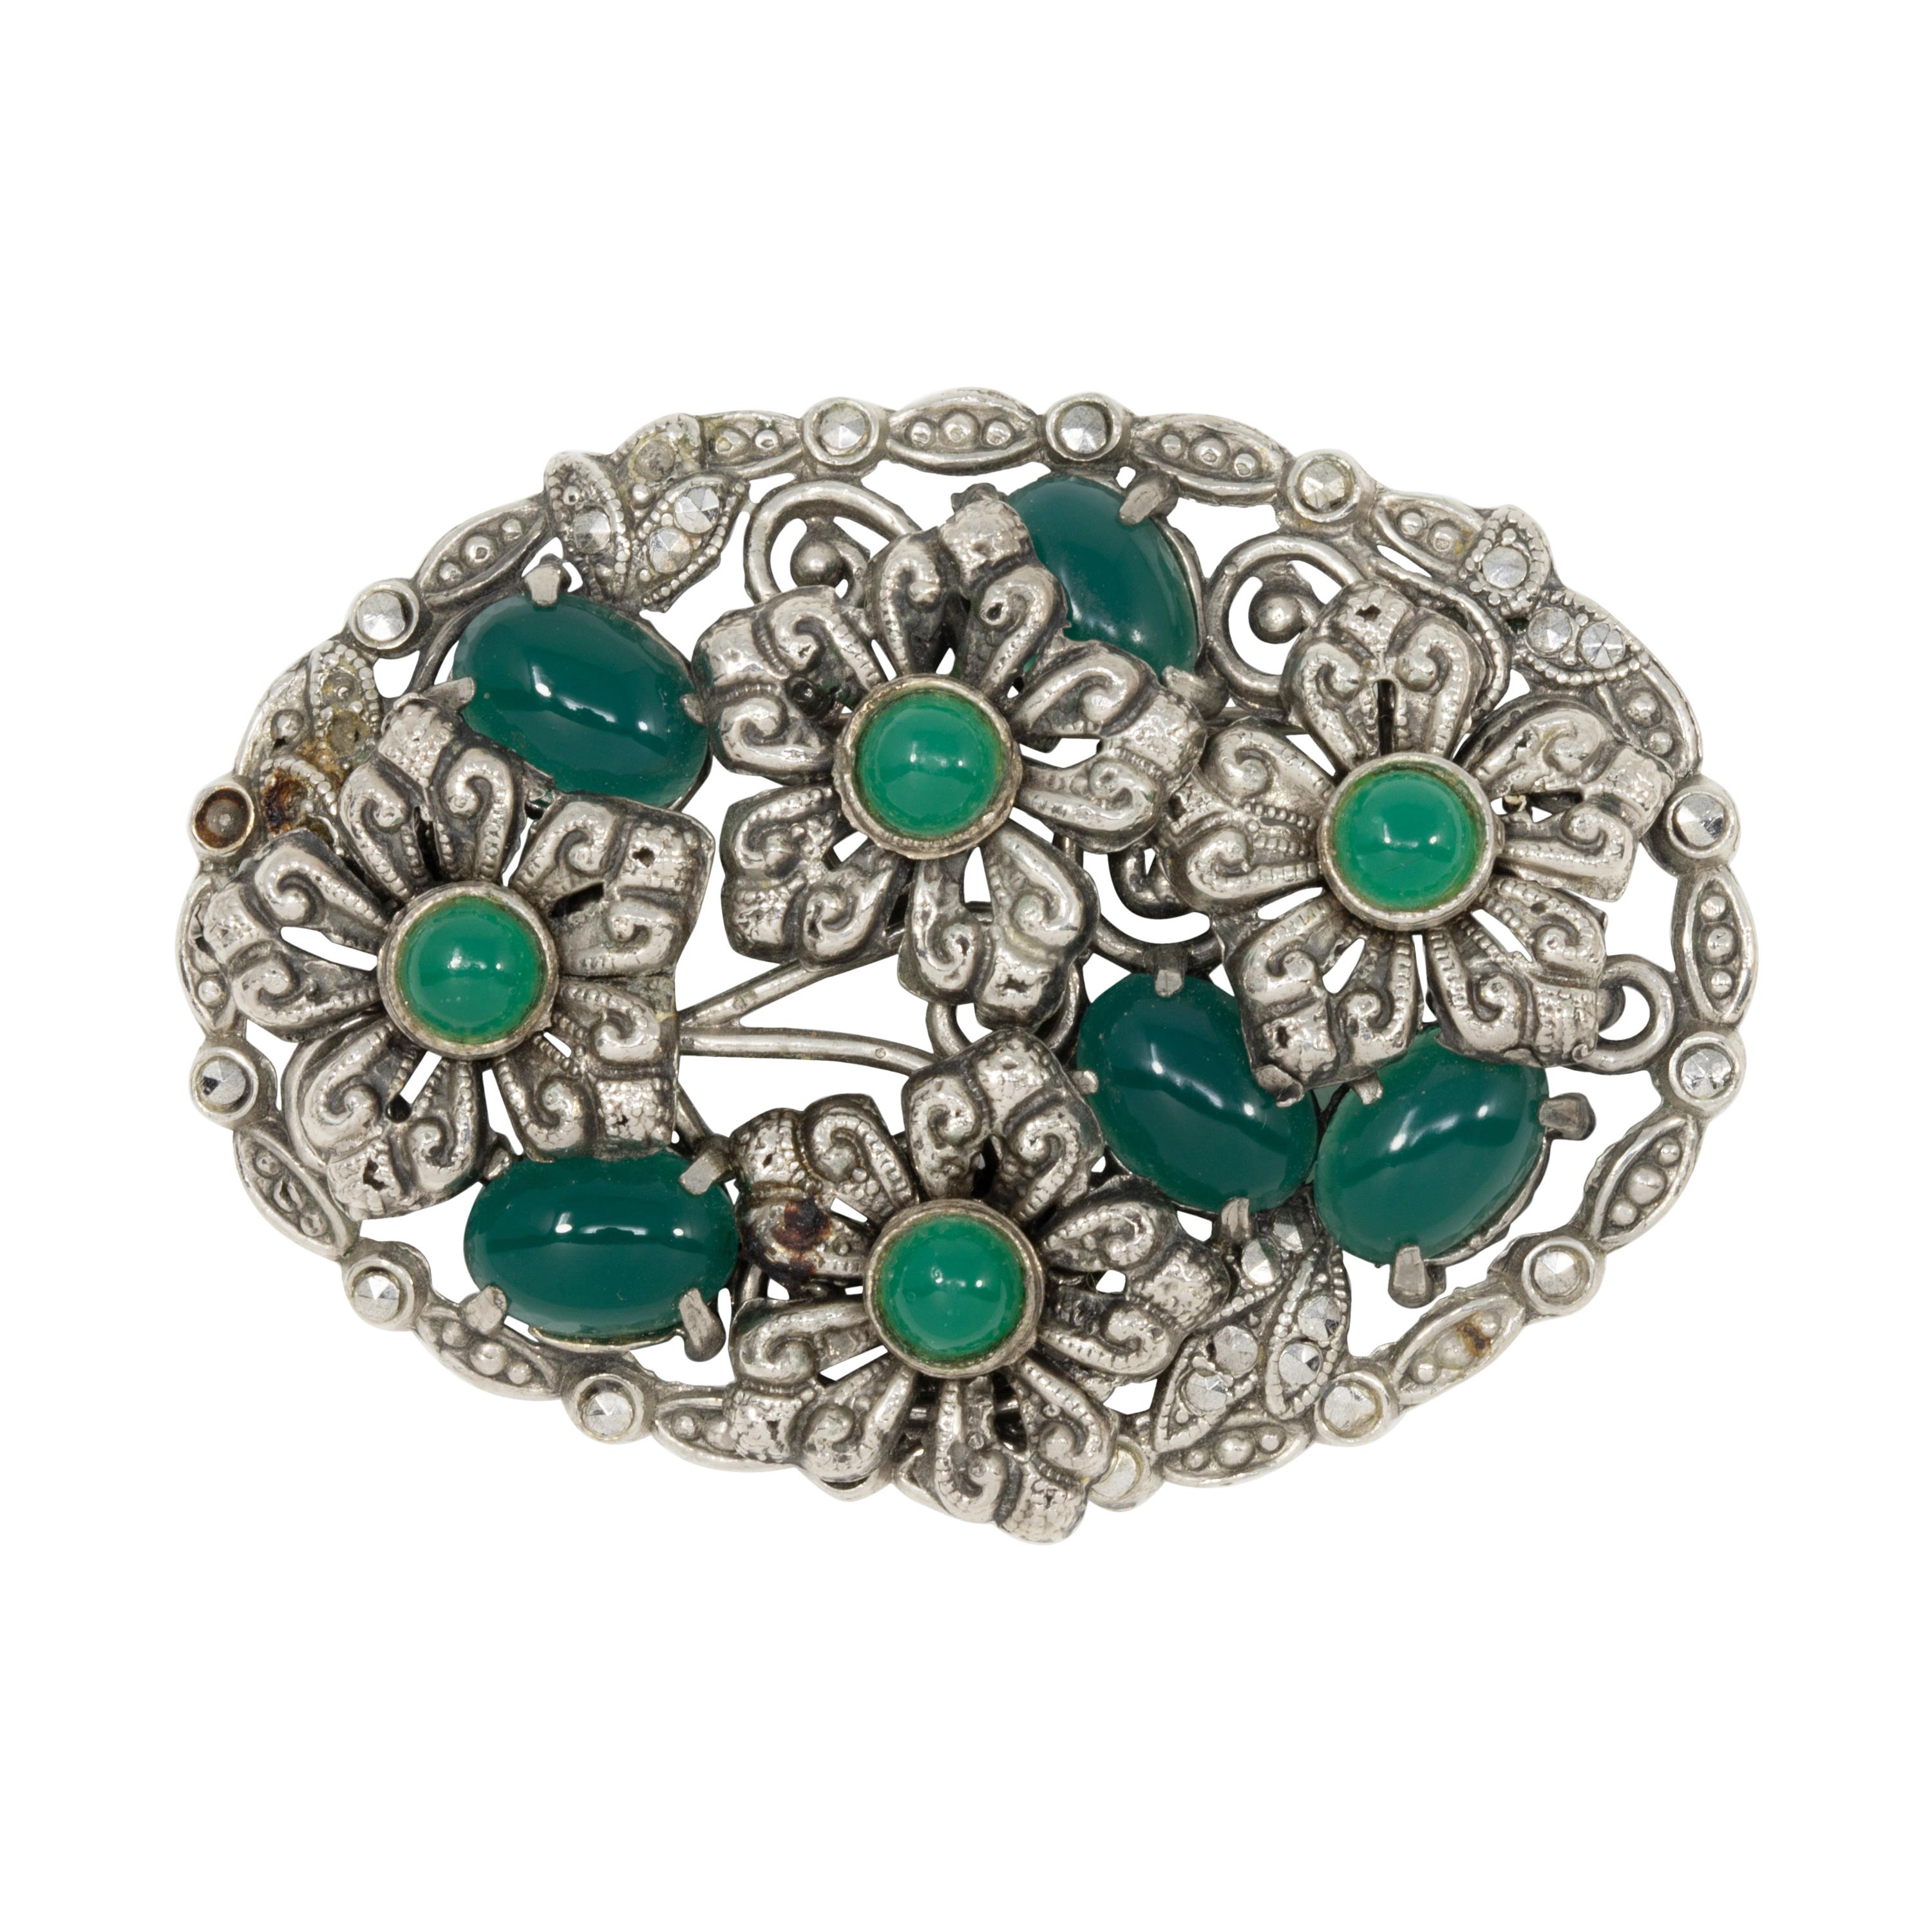 Emerald Cabochon Flower Oval Pin Brooch in Silver, Early 1900s